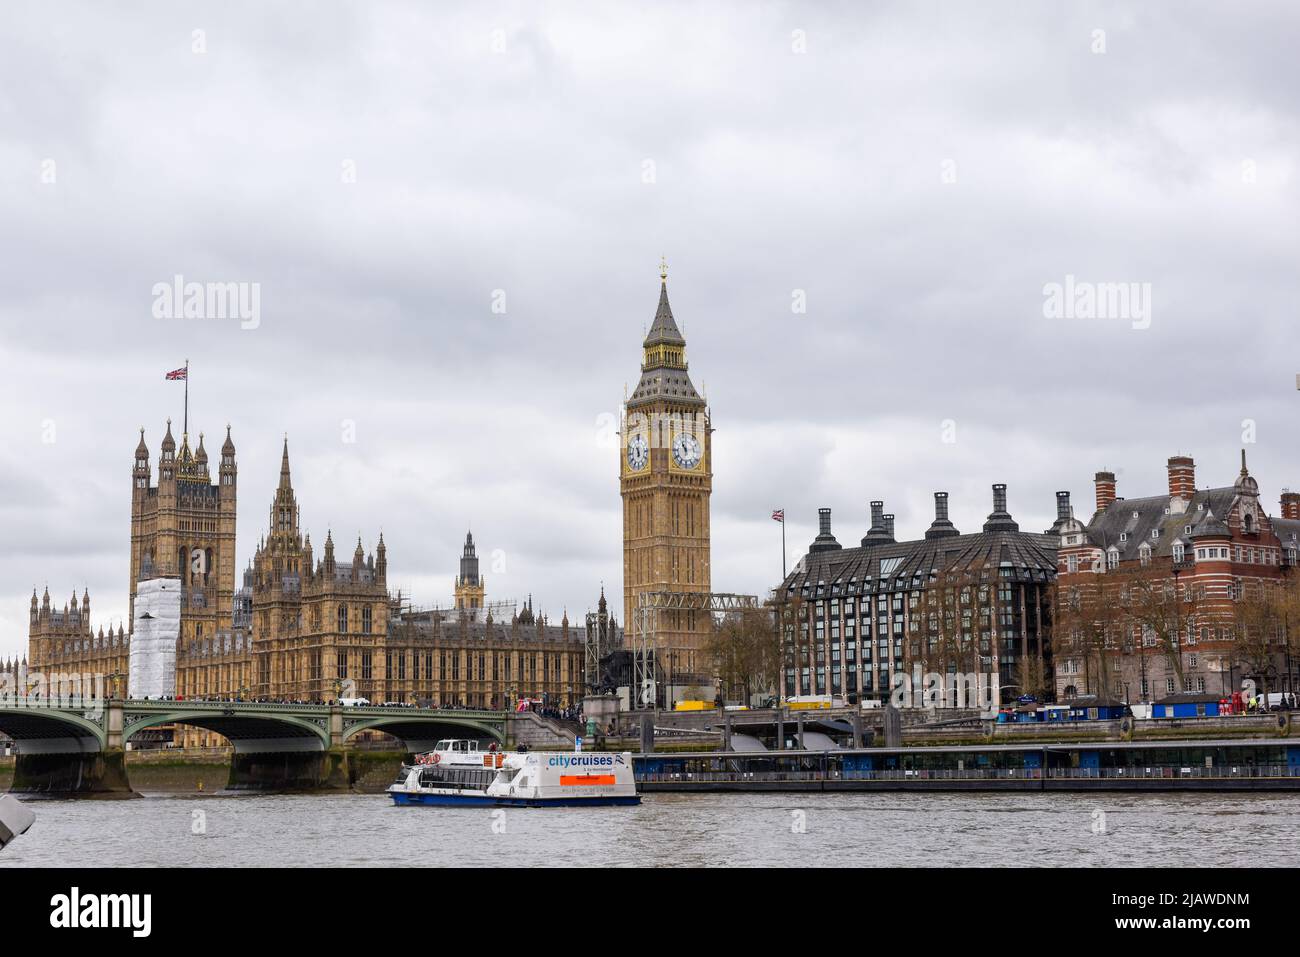 Westminster, London/ England - April 5 2022 - Big Ben is the clock housed in Elizabeth Tower in the Palace of Westminster and has been recently refurb Stock Photo